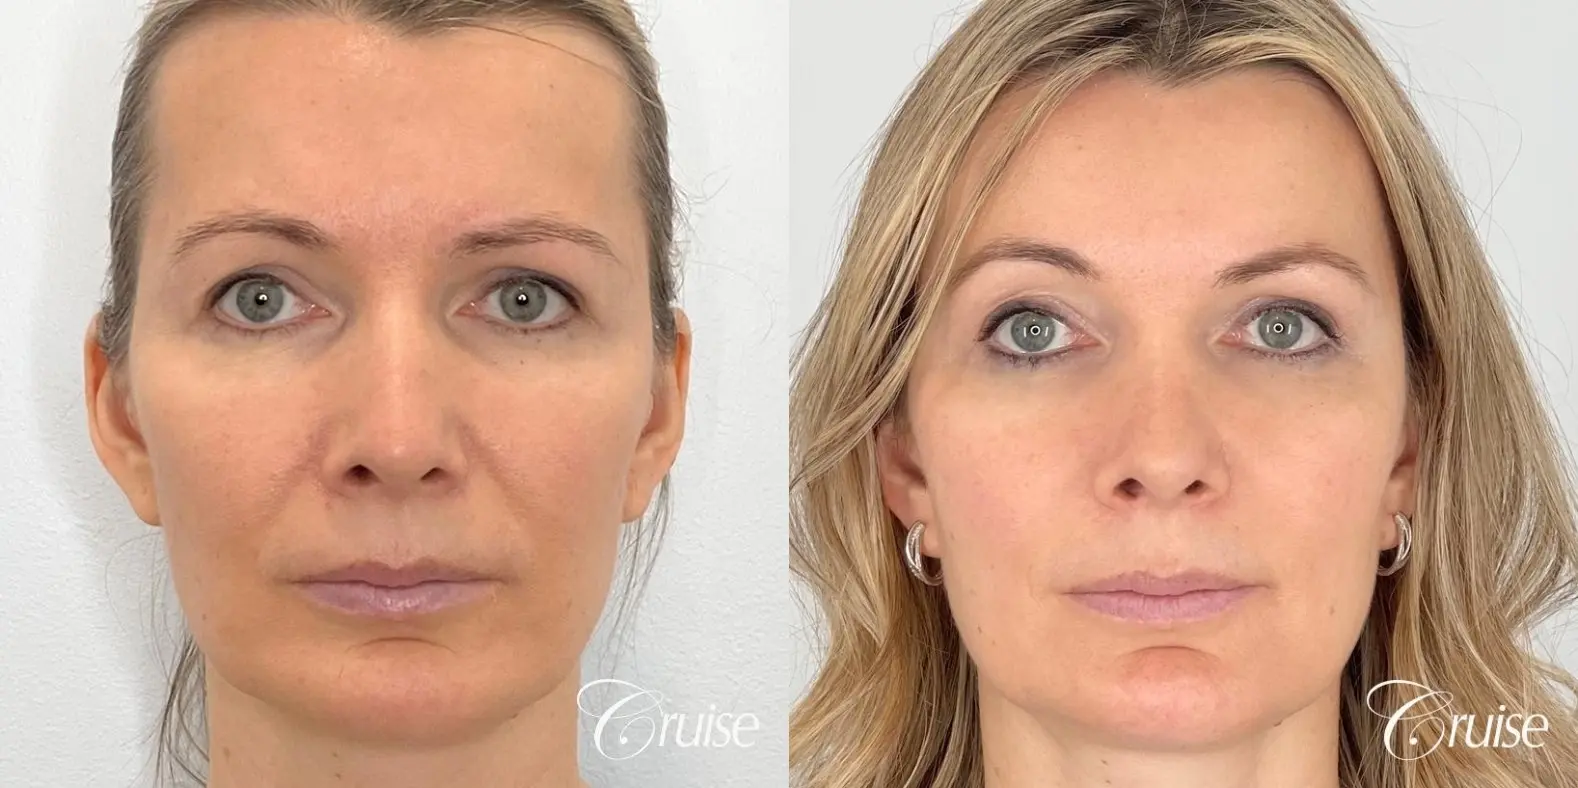 Fat Transfer for Facial Rejuvenation - Before and After 1